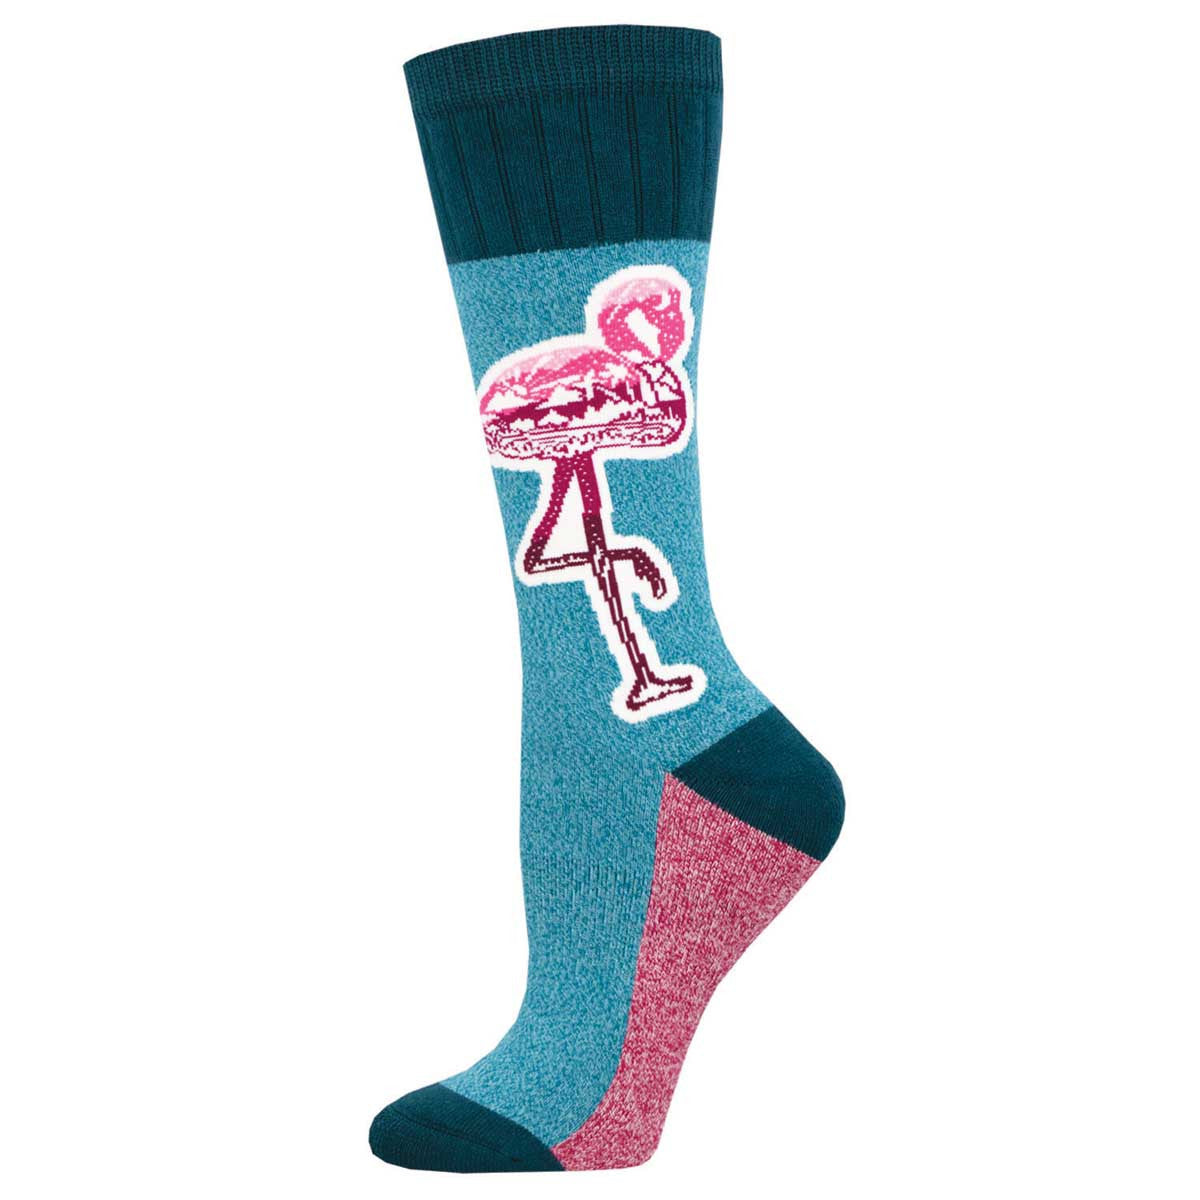 A pair of blue socks with pink flamingos on them.